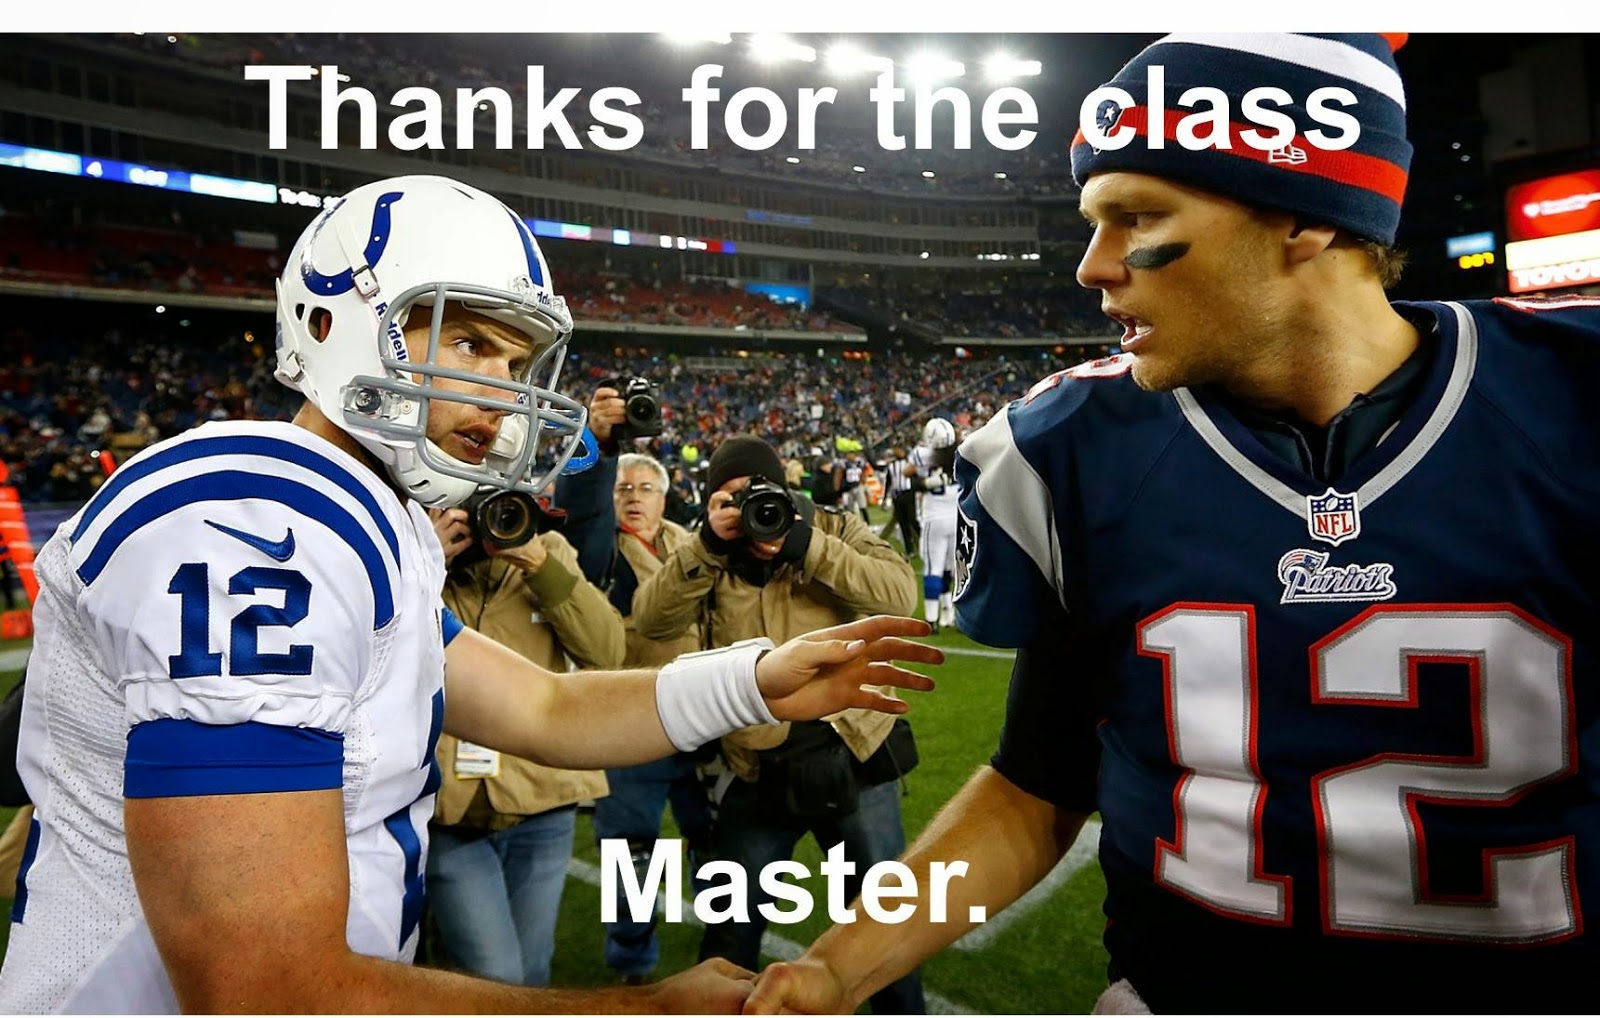 Thanks for the class master